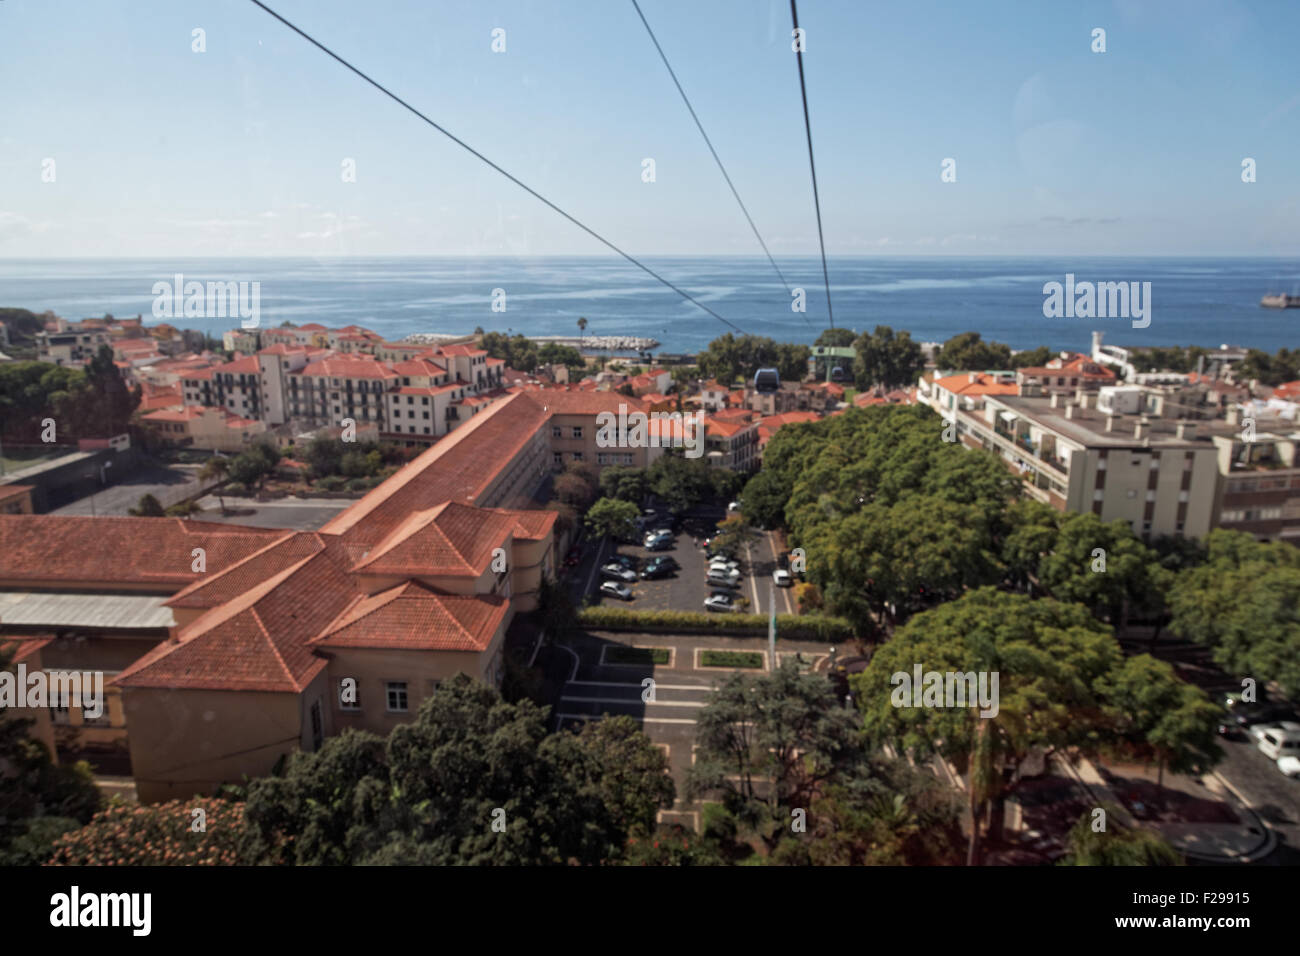 A view from a cable-car across Funchal, Madeira and the Atlantic ocean Stock Photo